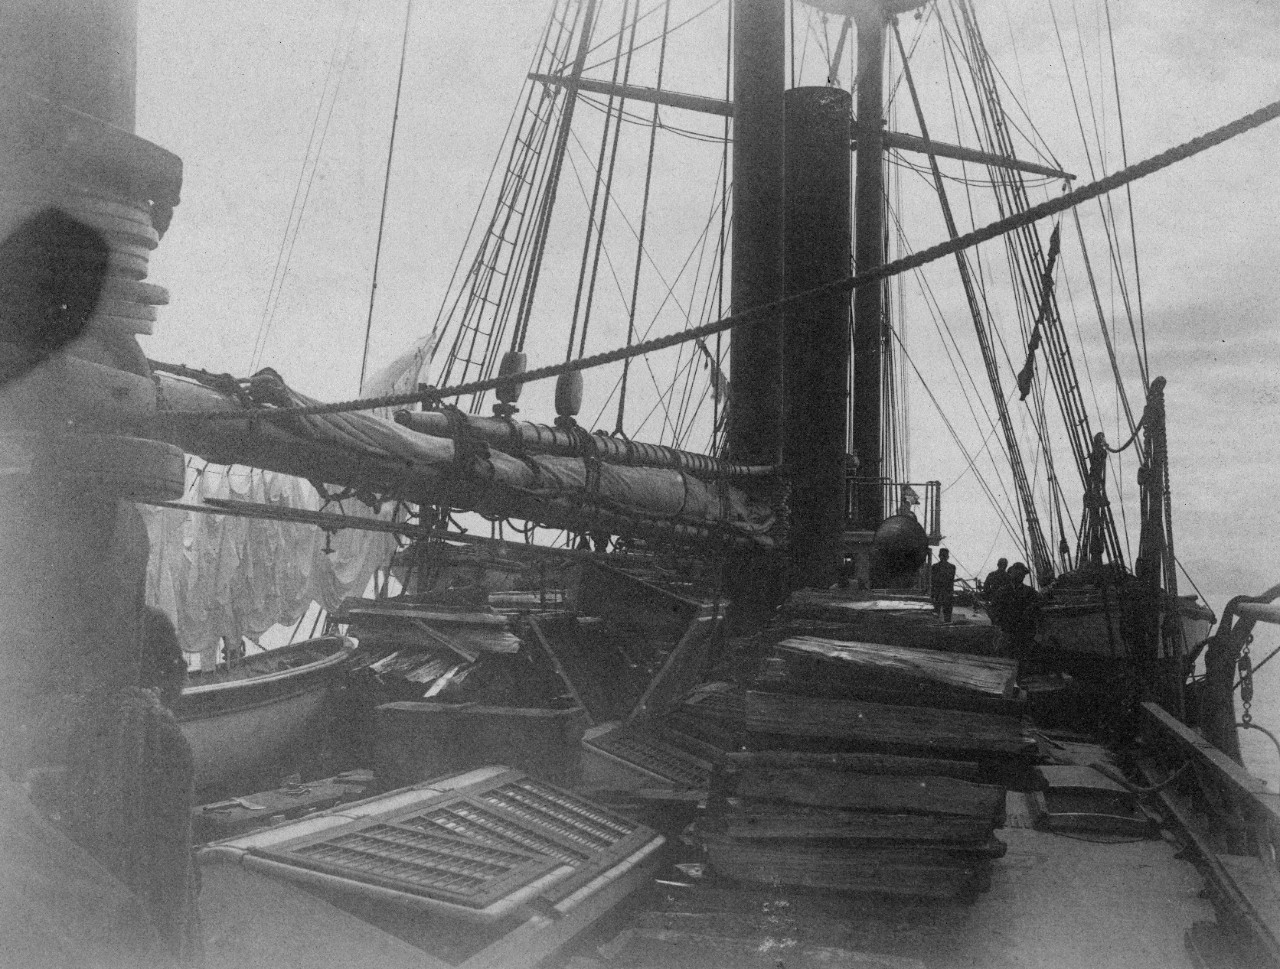 399 photographs donated by Rear Admiral Charles Mitchell Thomas to the Naval Historical Foundation, and then subsequently donated to the Naval History and Heritage Command. Primary topic is exploration by United States Coast and Geodetic Survey Steamer Carlile P. Patterson around Alaska, 1885-1887, with many landscape shots. Also photos from other periods of Thomas’ career in the late 19th century, including USRS Franklin and Norfolk Navy Yard. Some photos have been assigned NH numbers or removed to the NH collection.